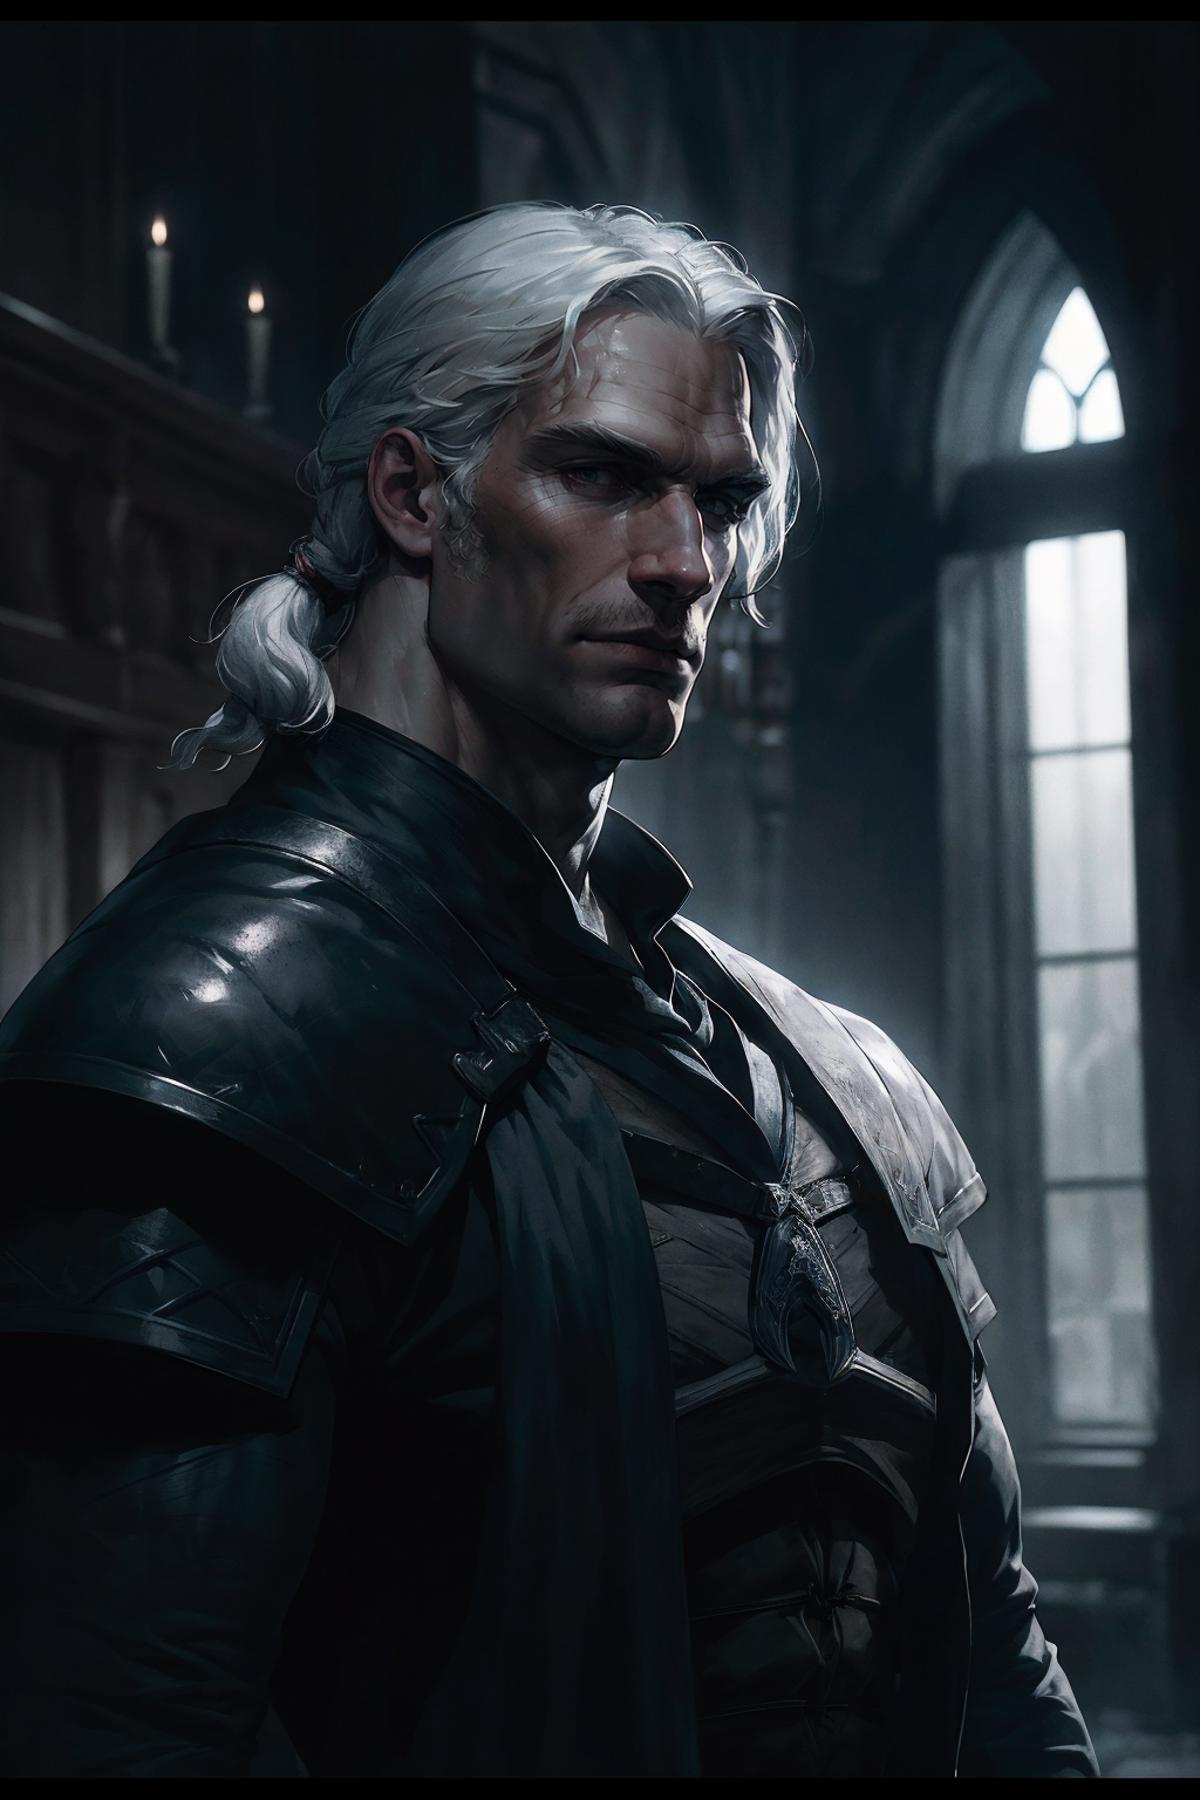 Dark Fantasy Character with White Hair and Beard, Dark Clothes, and a Sword.